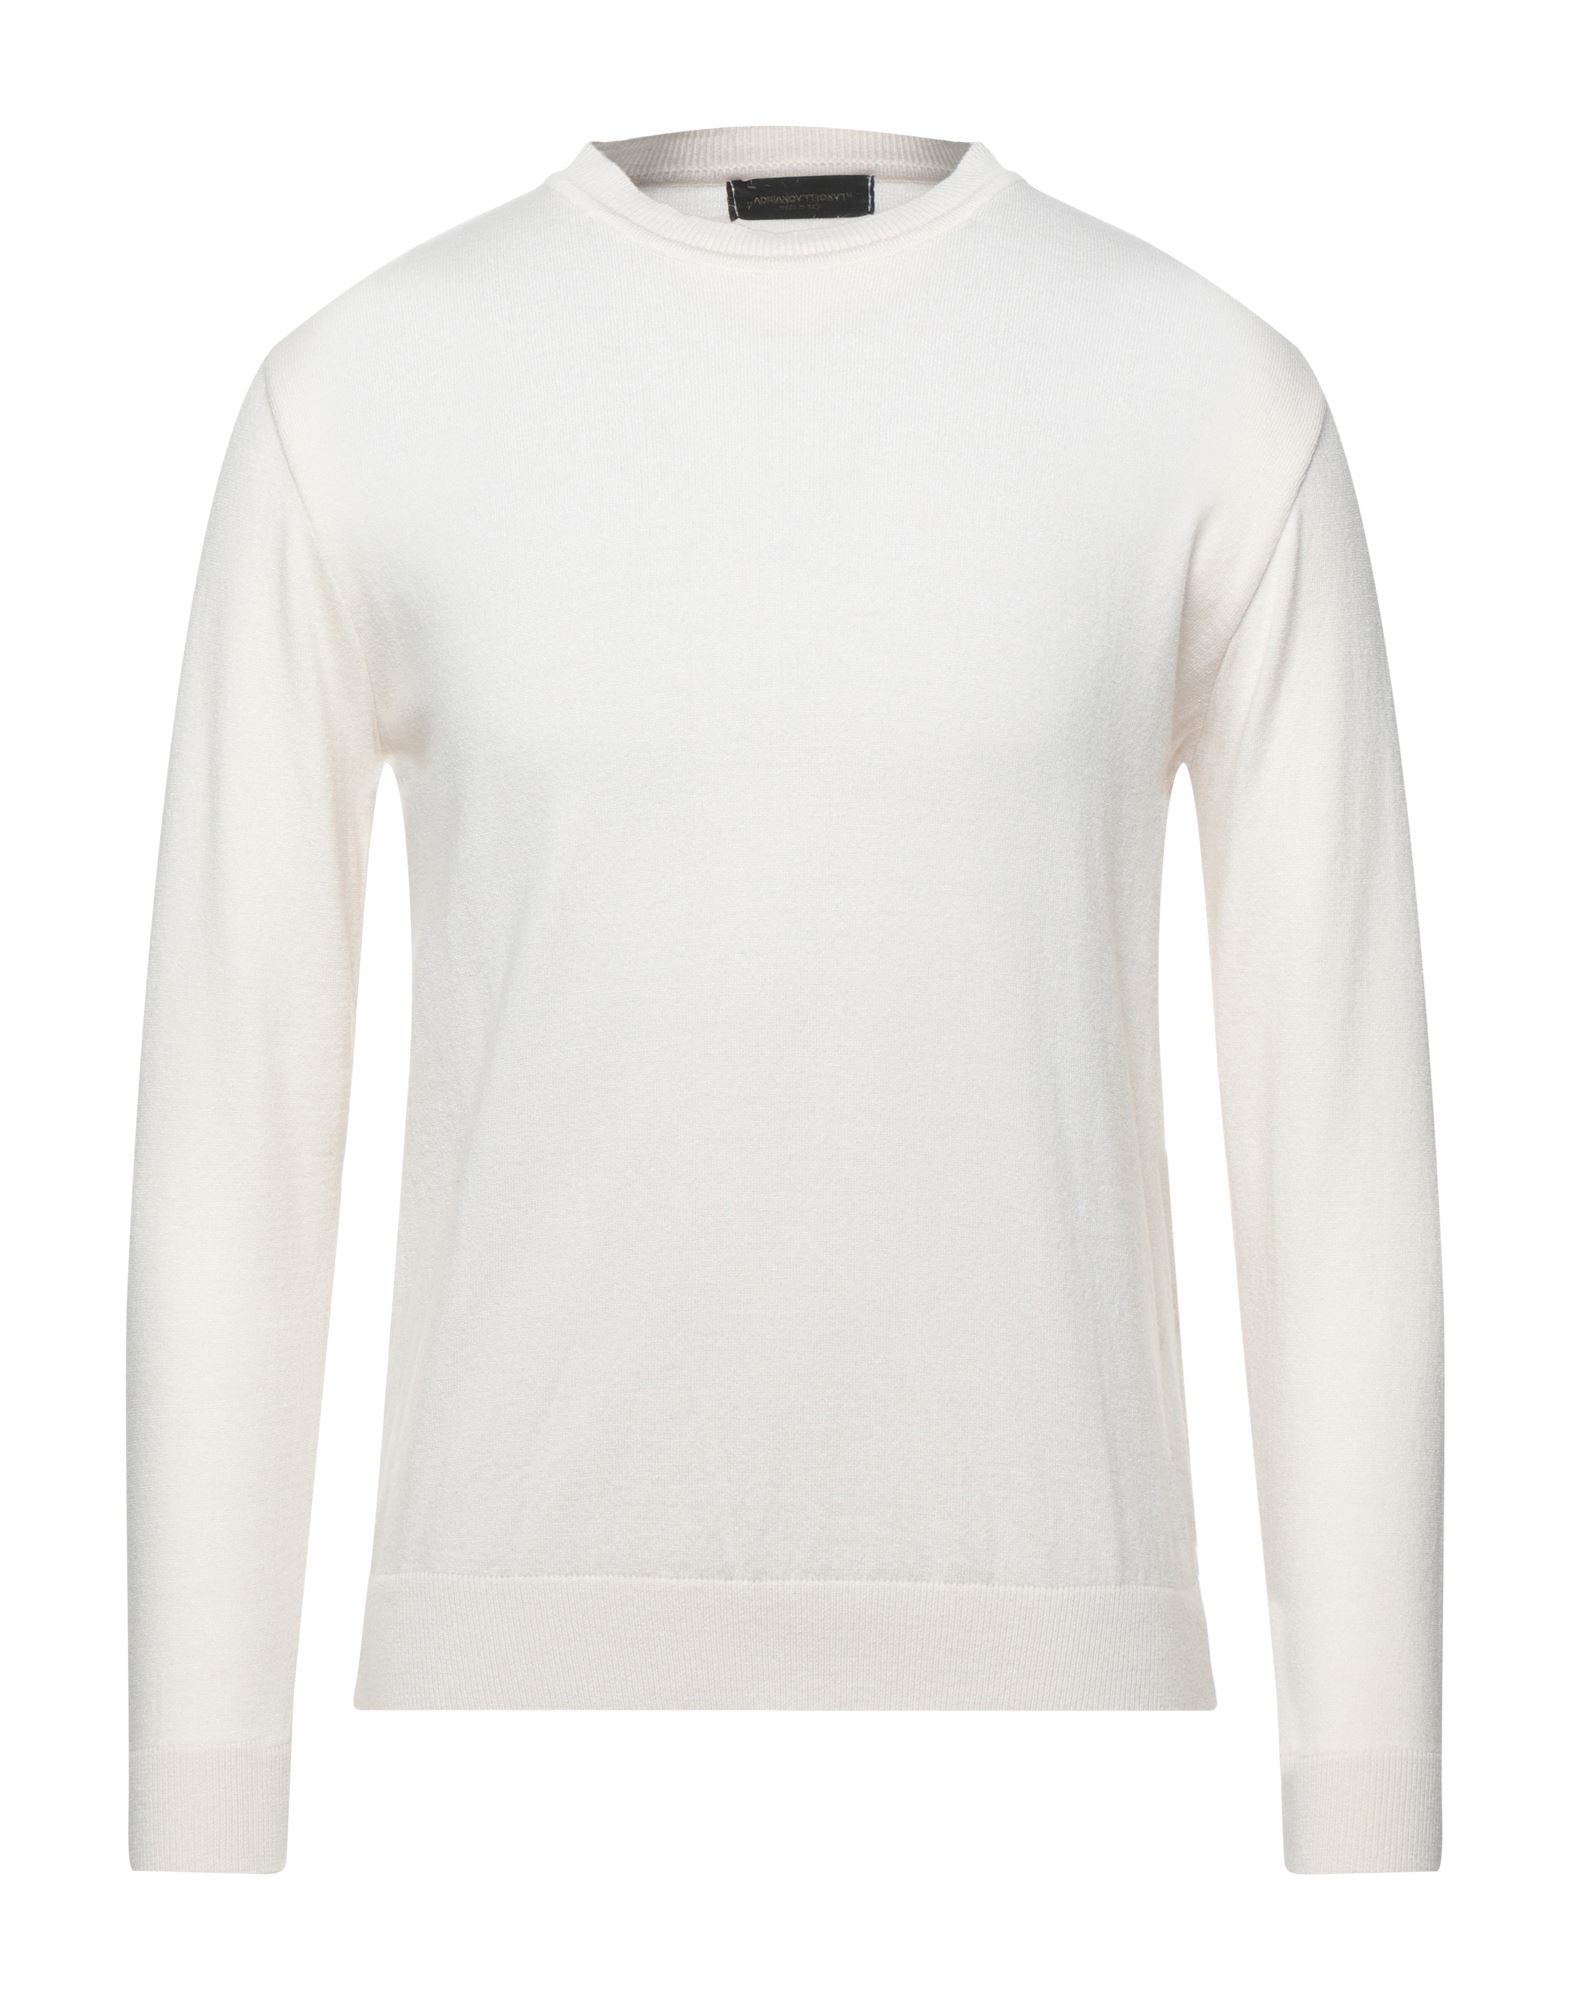 Adriano Langella Sweaters In Ivory